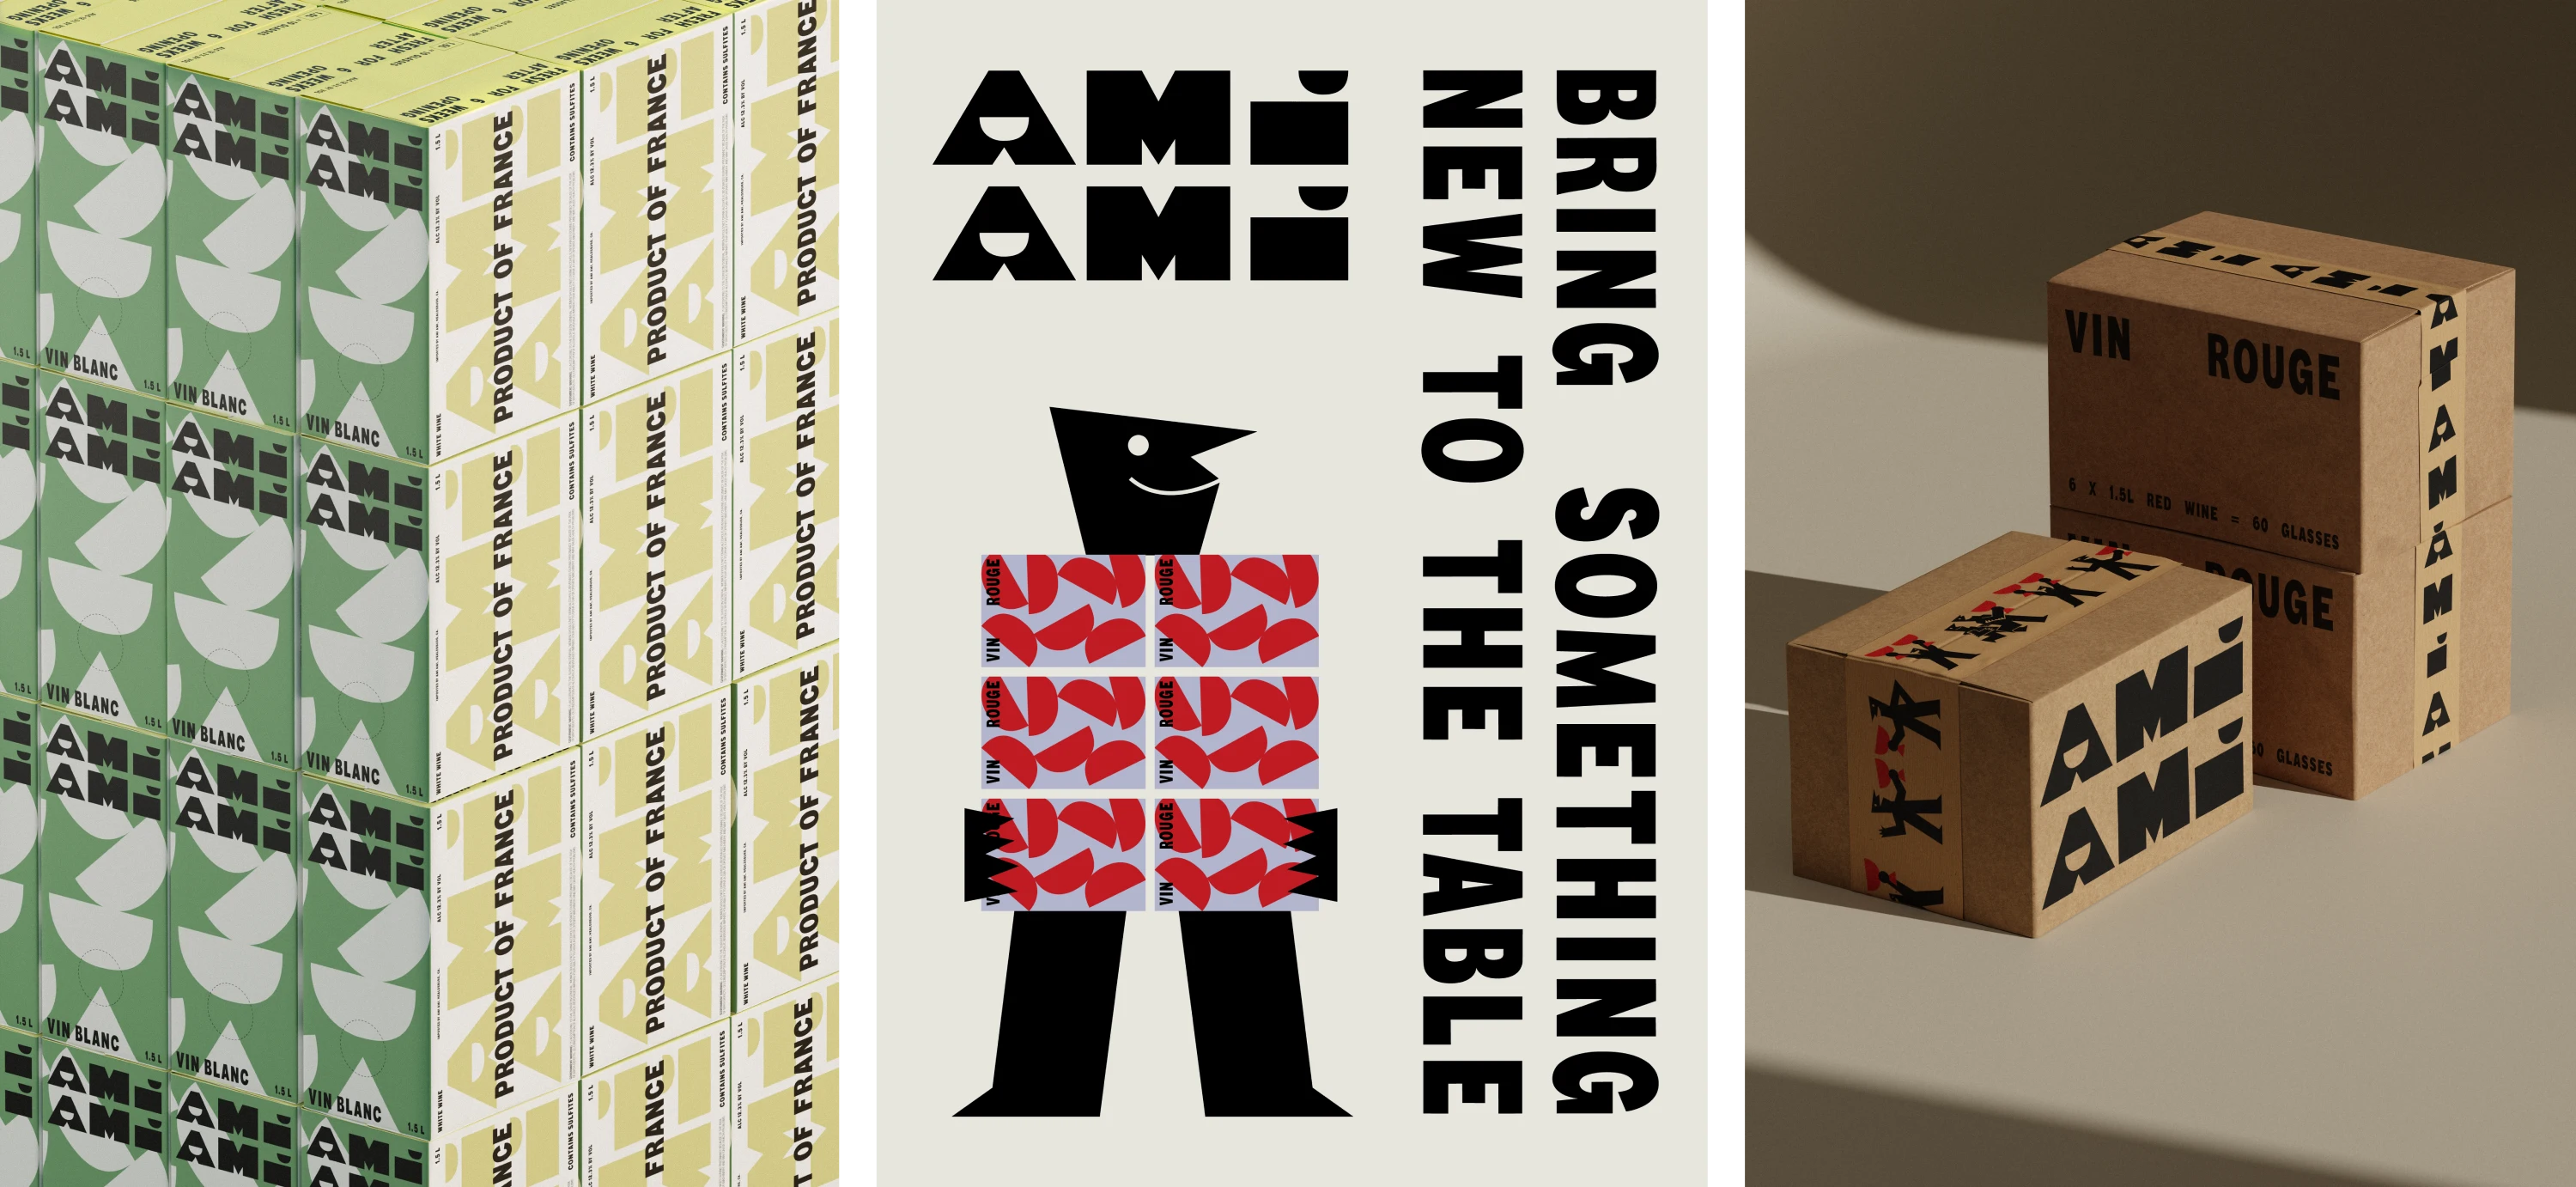 63ee9a08f80261a7c1649329_wedge-ami-ami-bring-something-new.png